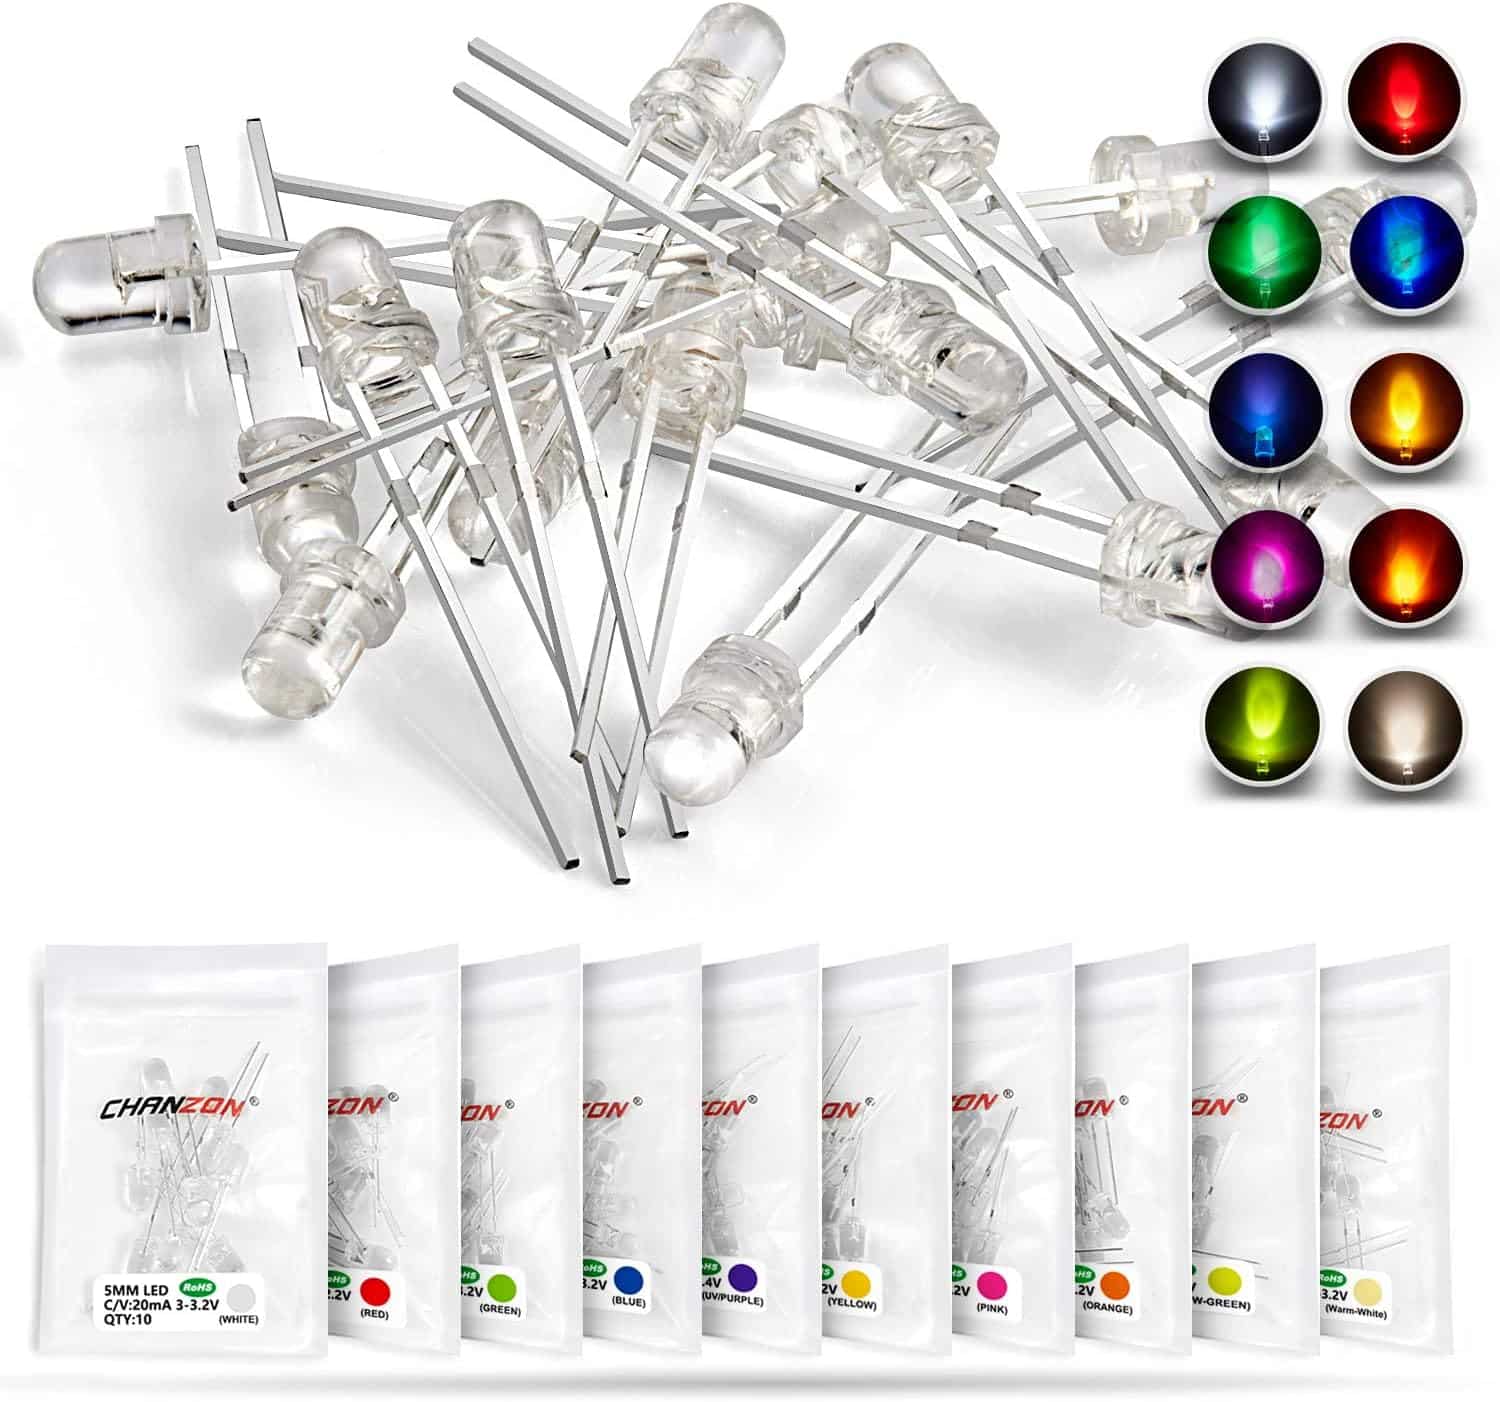 CHANZON 100pcs (10 Colors x 10pcs) 3mm LED Diode Lights Assortment (Clear Transparent Lens) Emitting Lighting Bulb Lamp Assorted Kit Variety Colour Warm White Red Yellow Green Blue Orange UV Pink